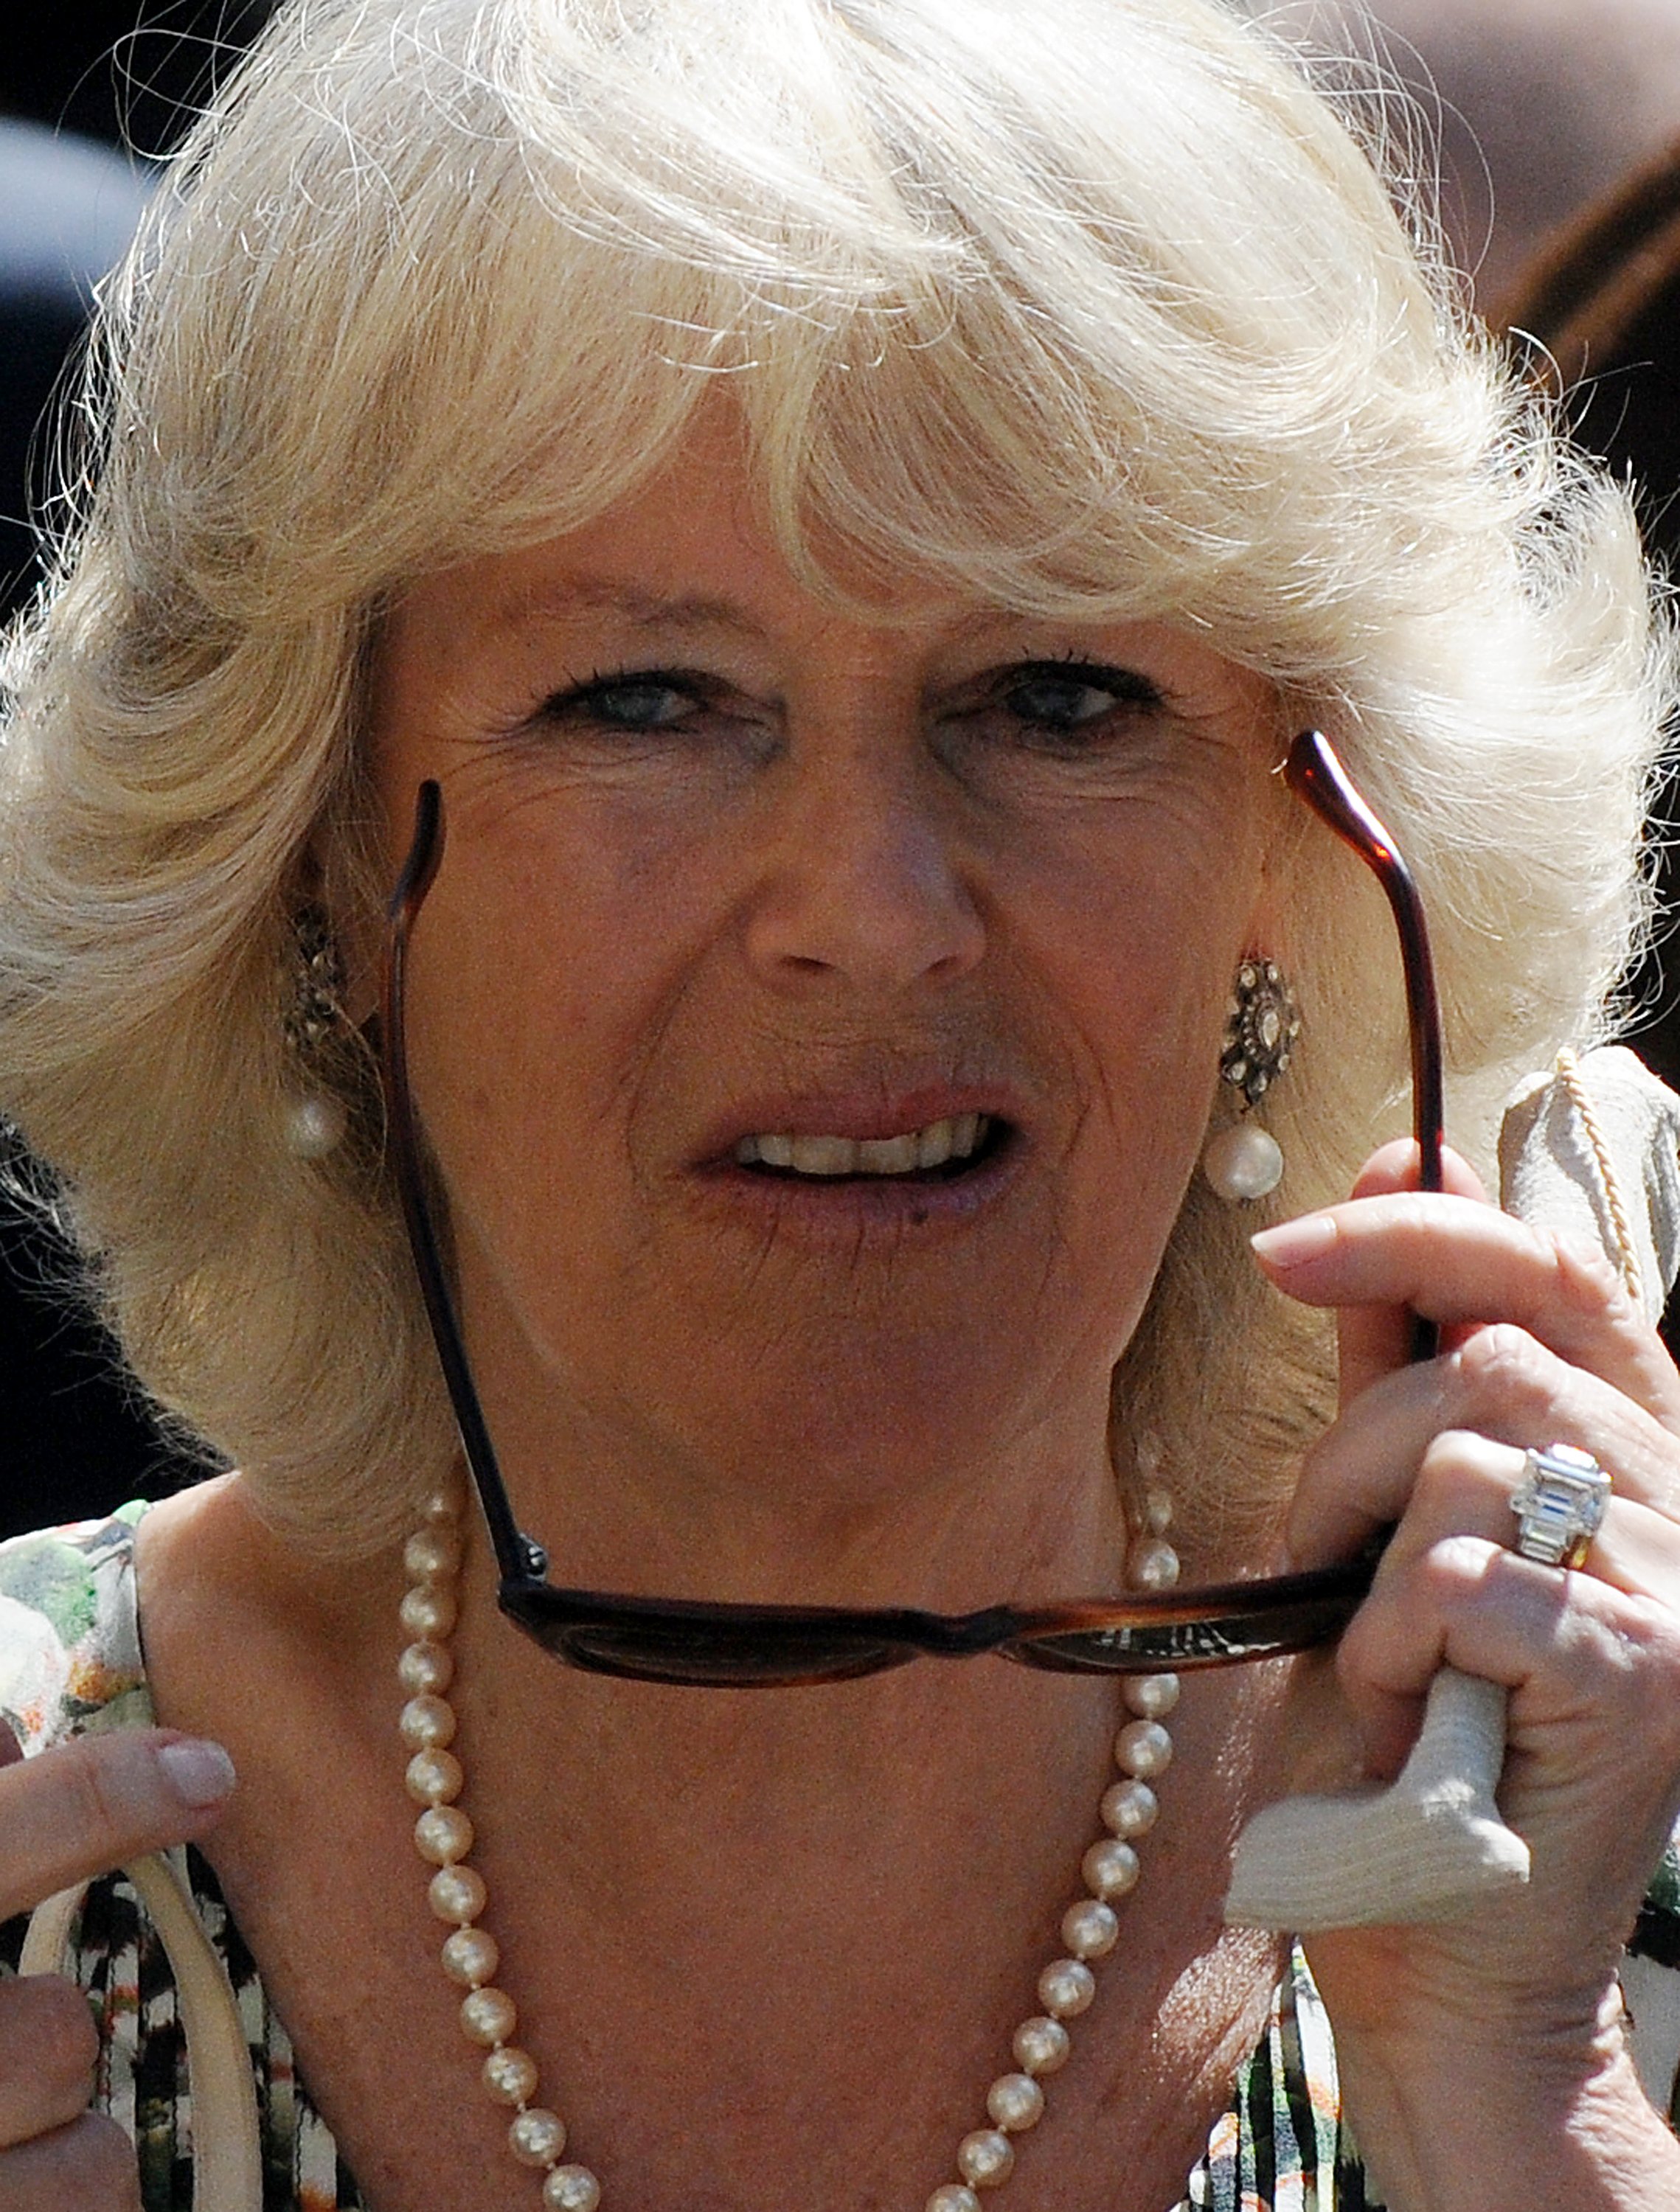 Duchess Camilla at her first official visit to Spain on April 1, 2011, in Sevilla. | Source: Getty Images